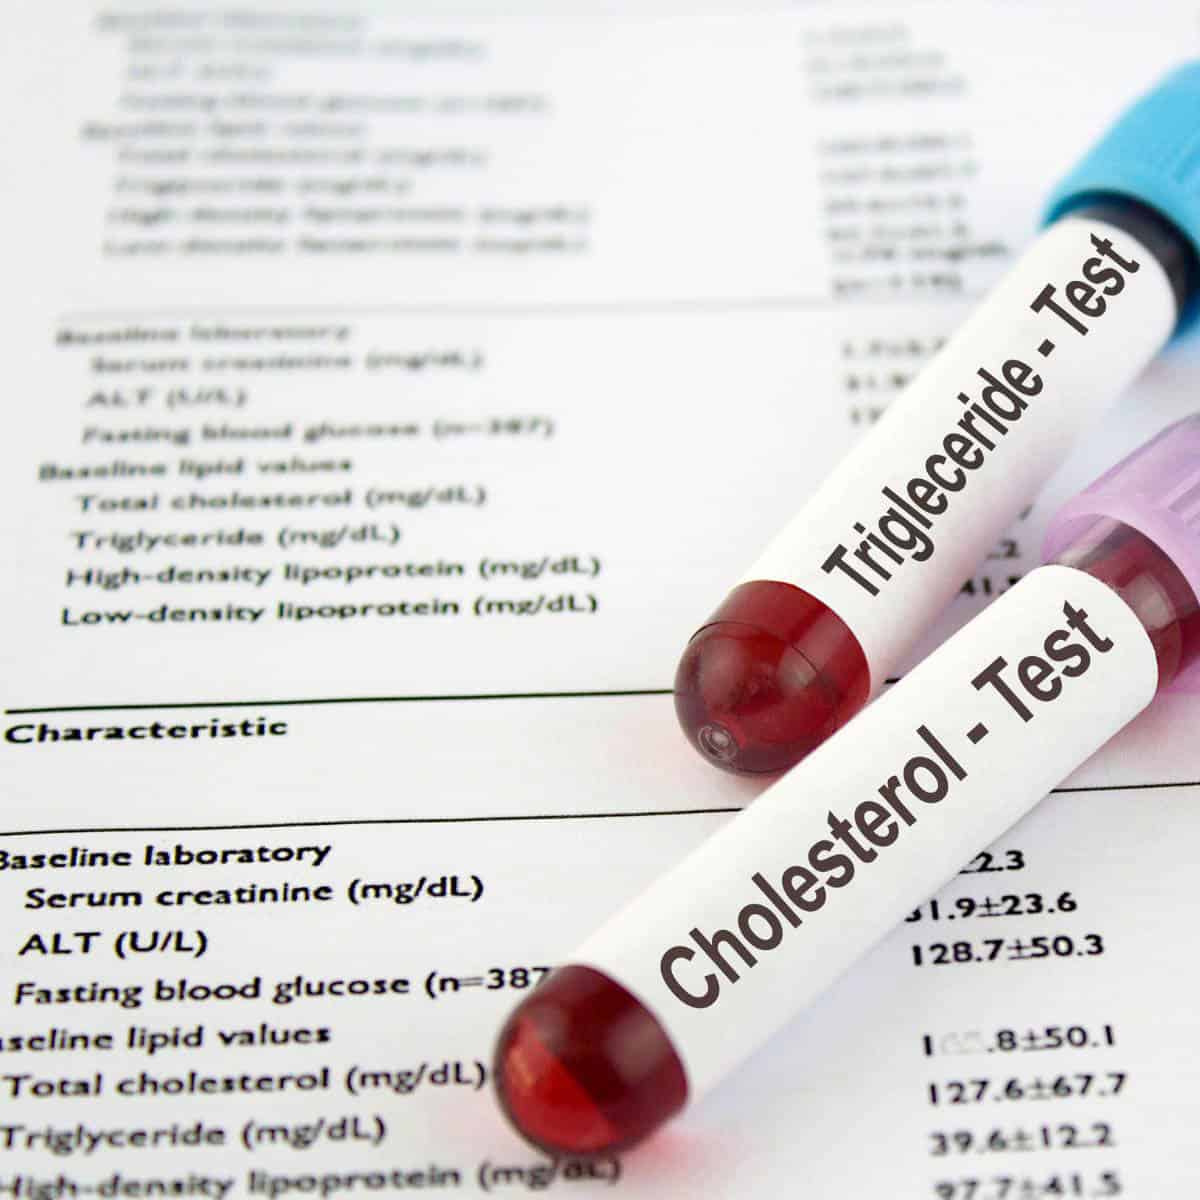 Cholesterol Levels showing on a report, test tubes with blood and cholesterol test typed on them.